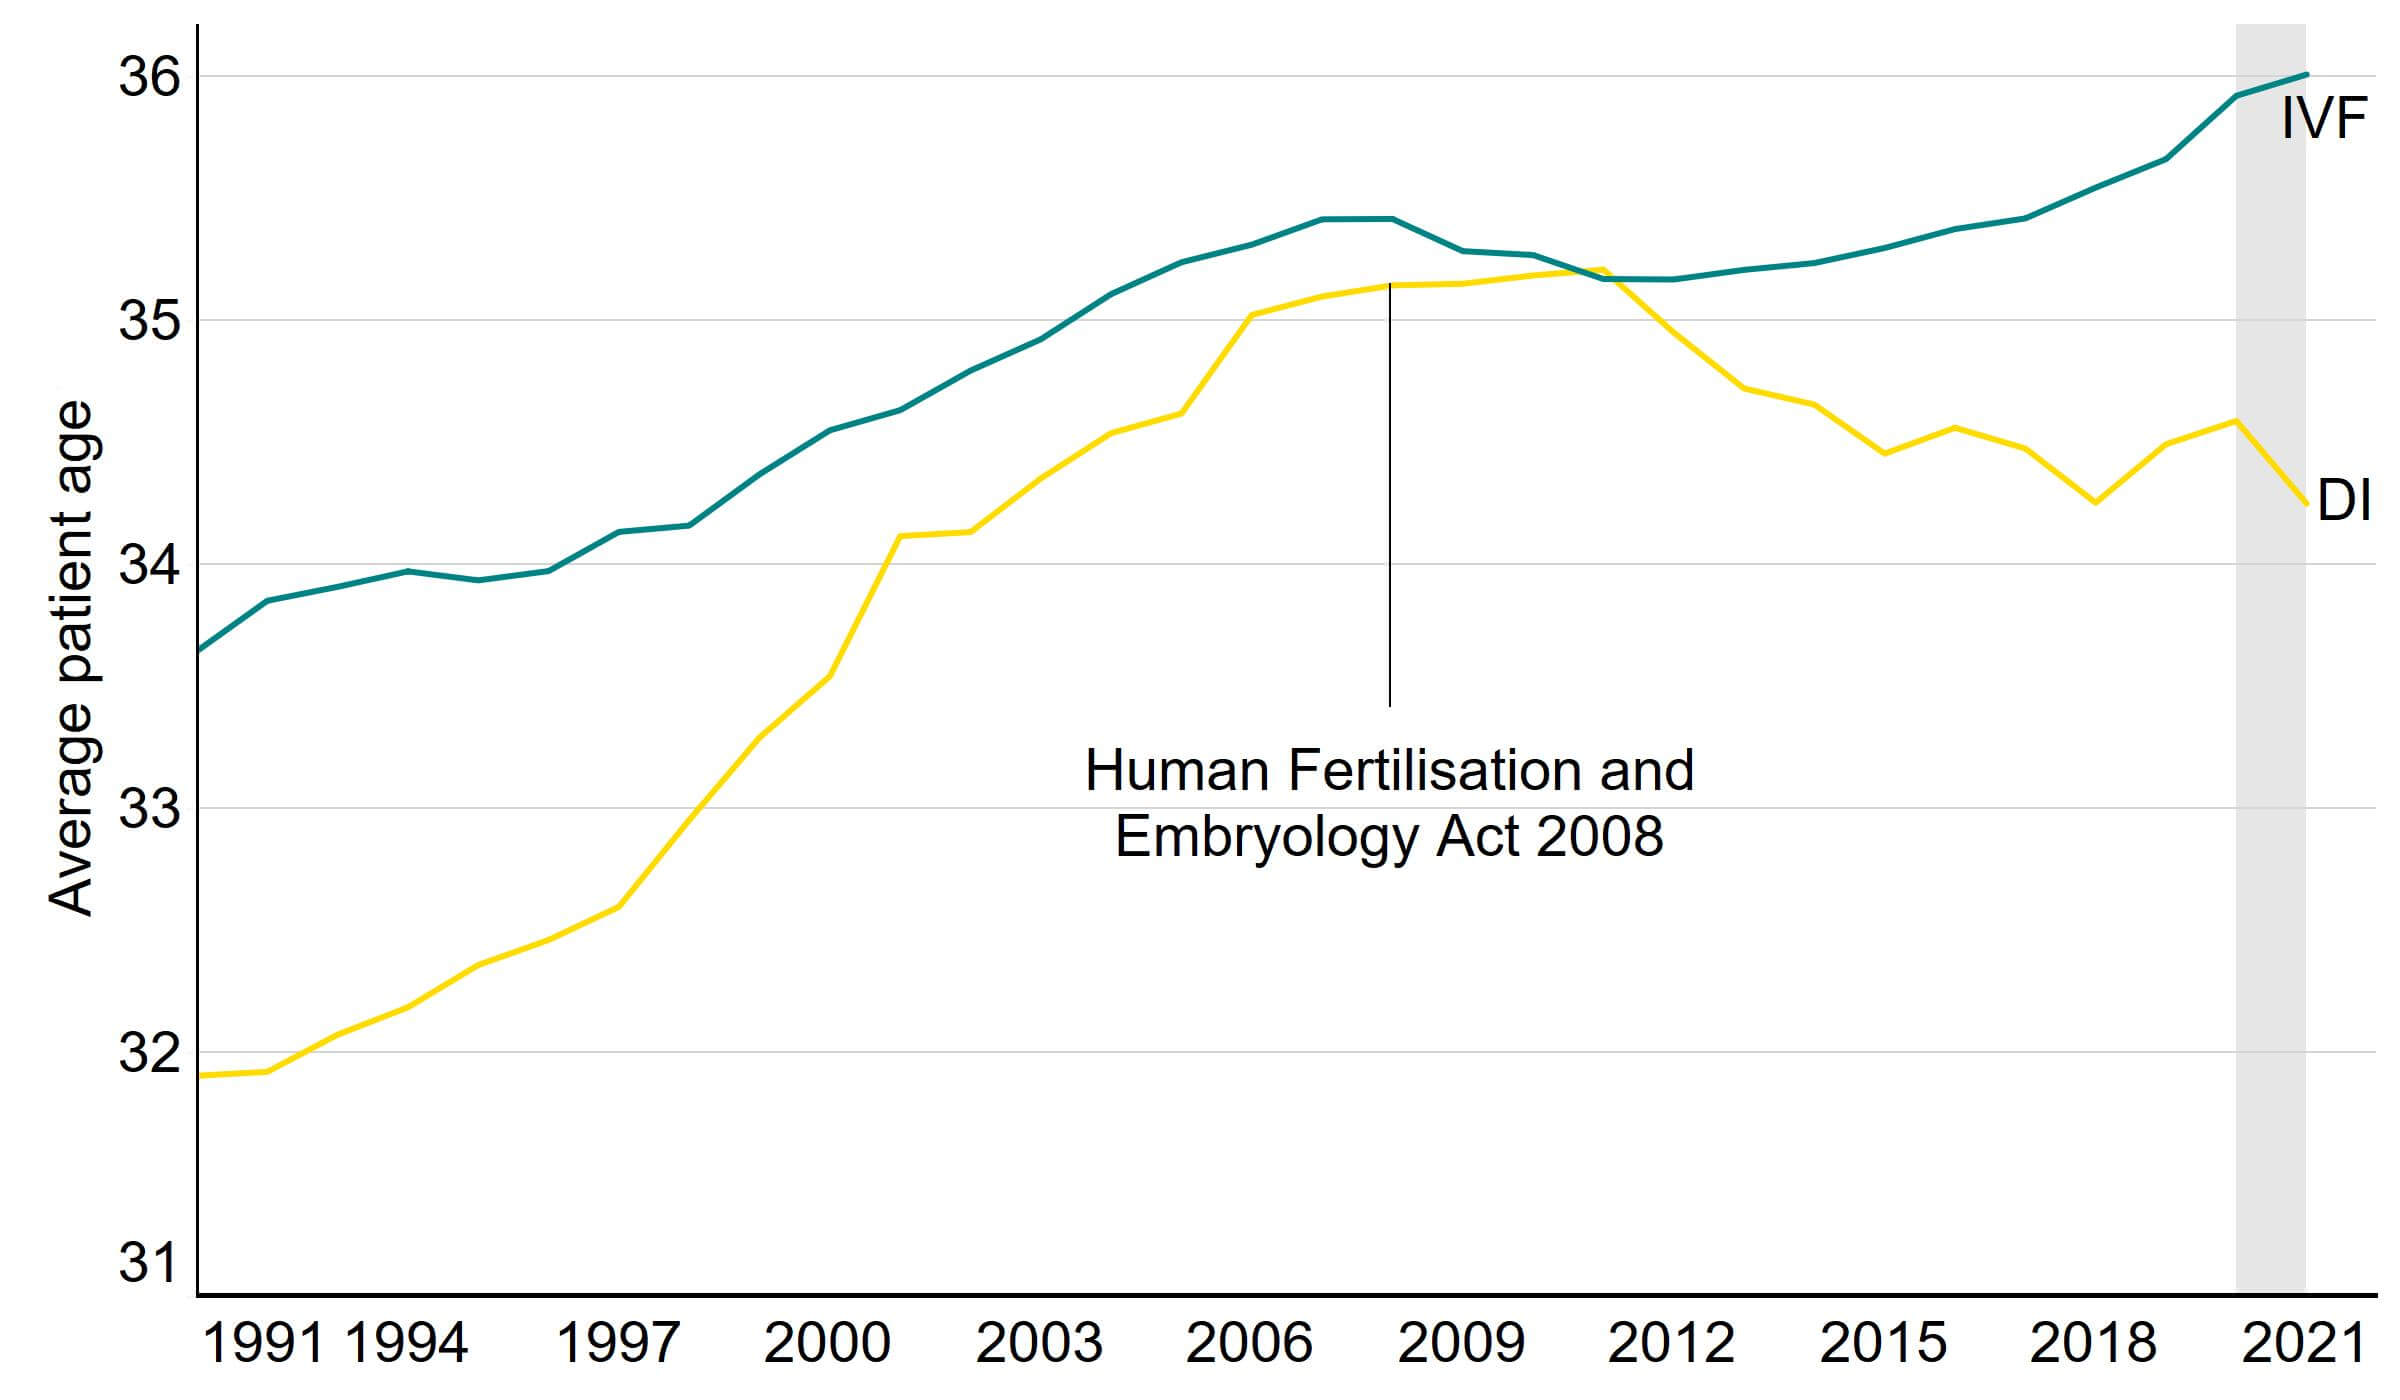 Line graph showing increase in average patient age in IVF cycles since the 1990s while decrease in DI cycles since 2011.